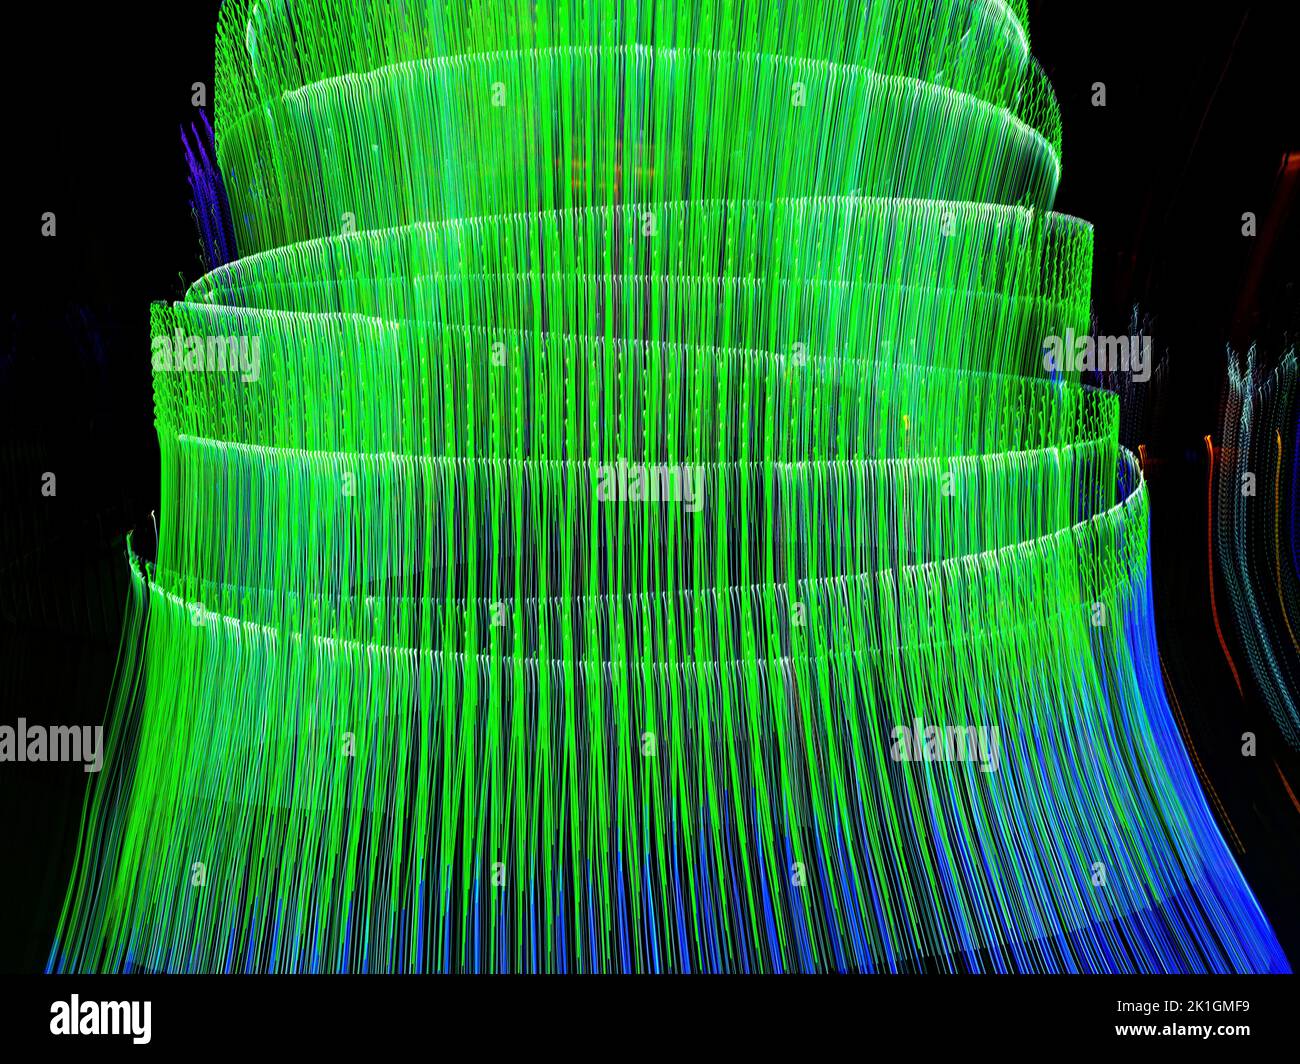 Strings and streaks of lights in an abstract form Stock Photo